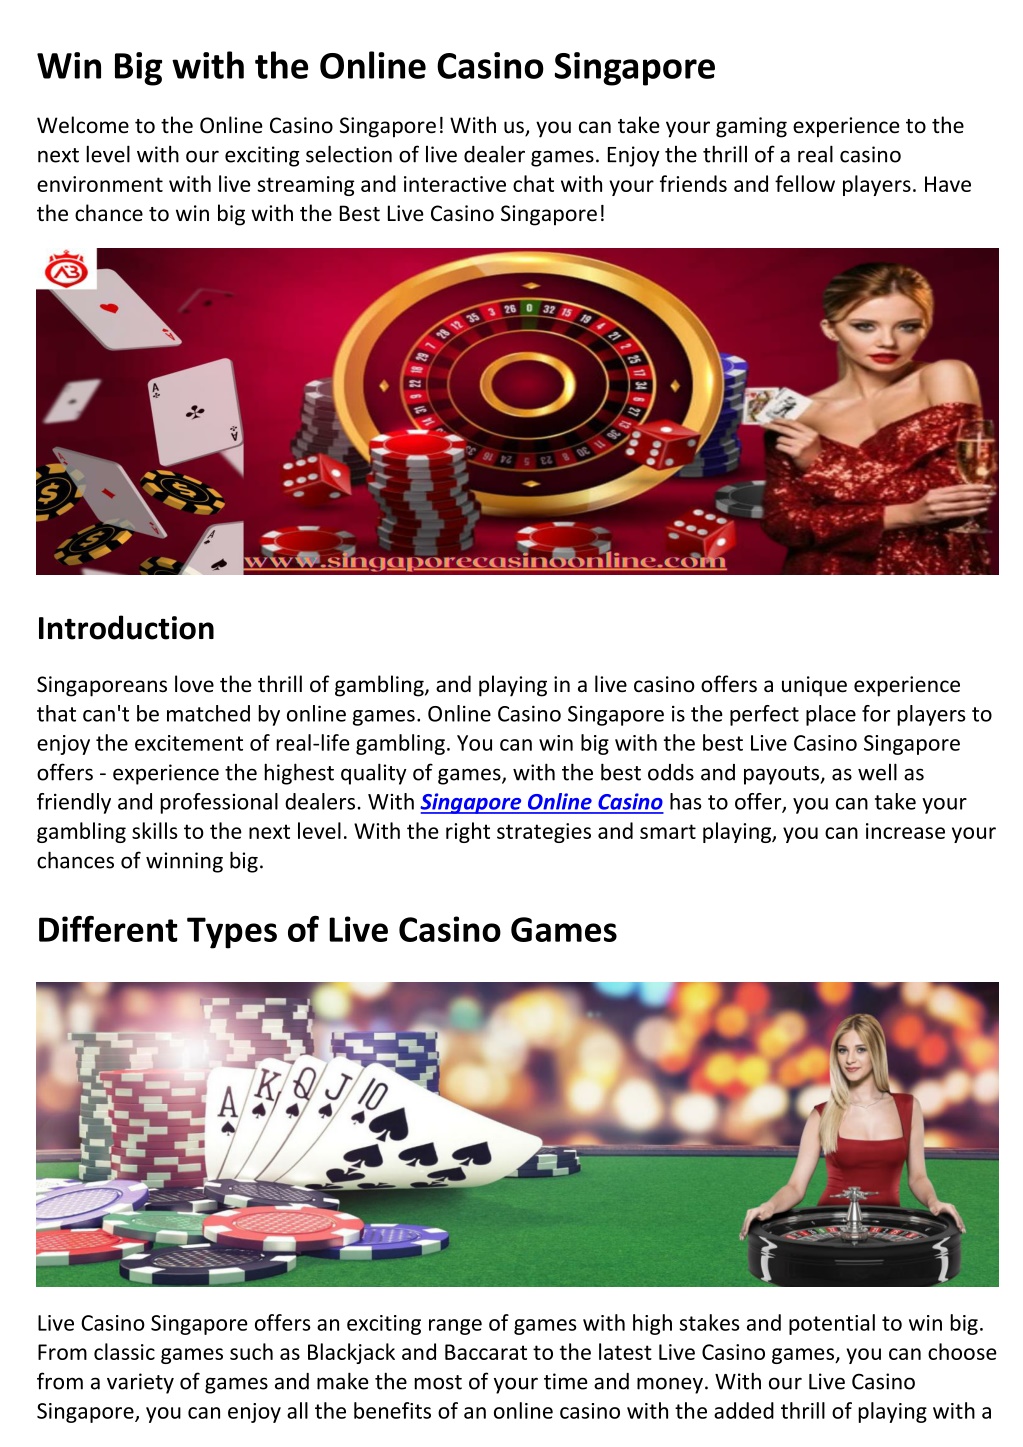 Clear And Unbiased Facts About BC Game Casino Review: Insights from Vietnam Without All the Hype